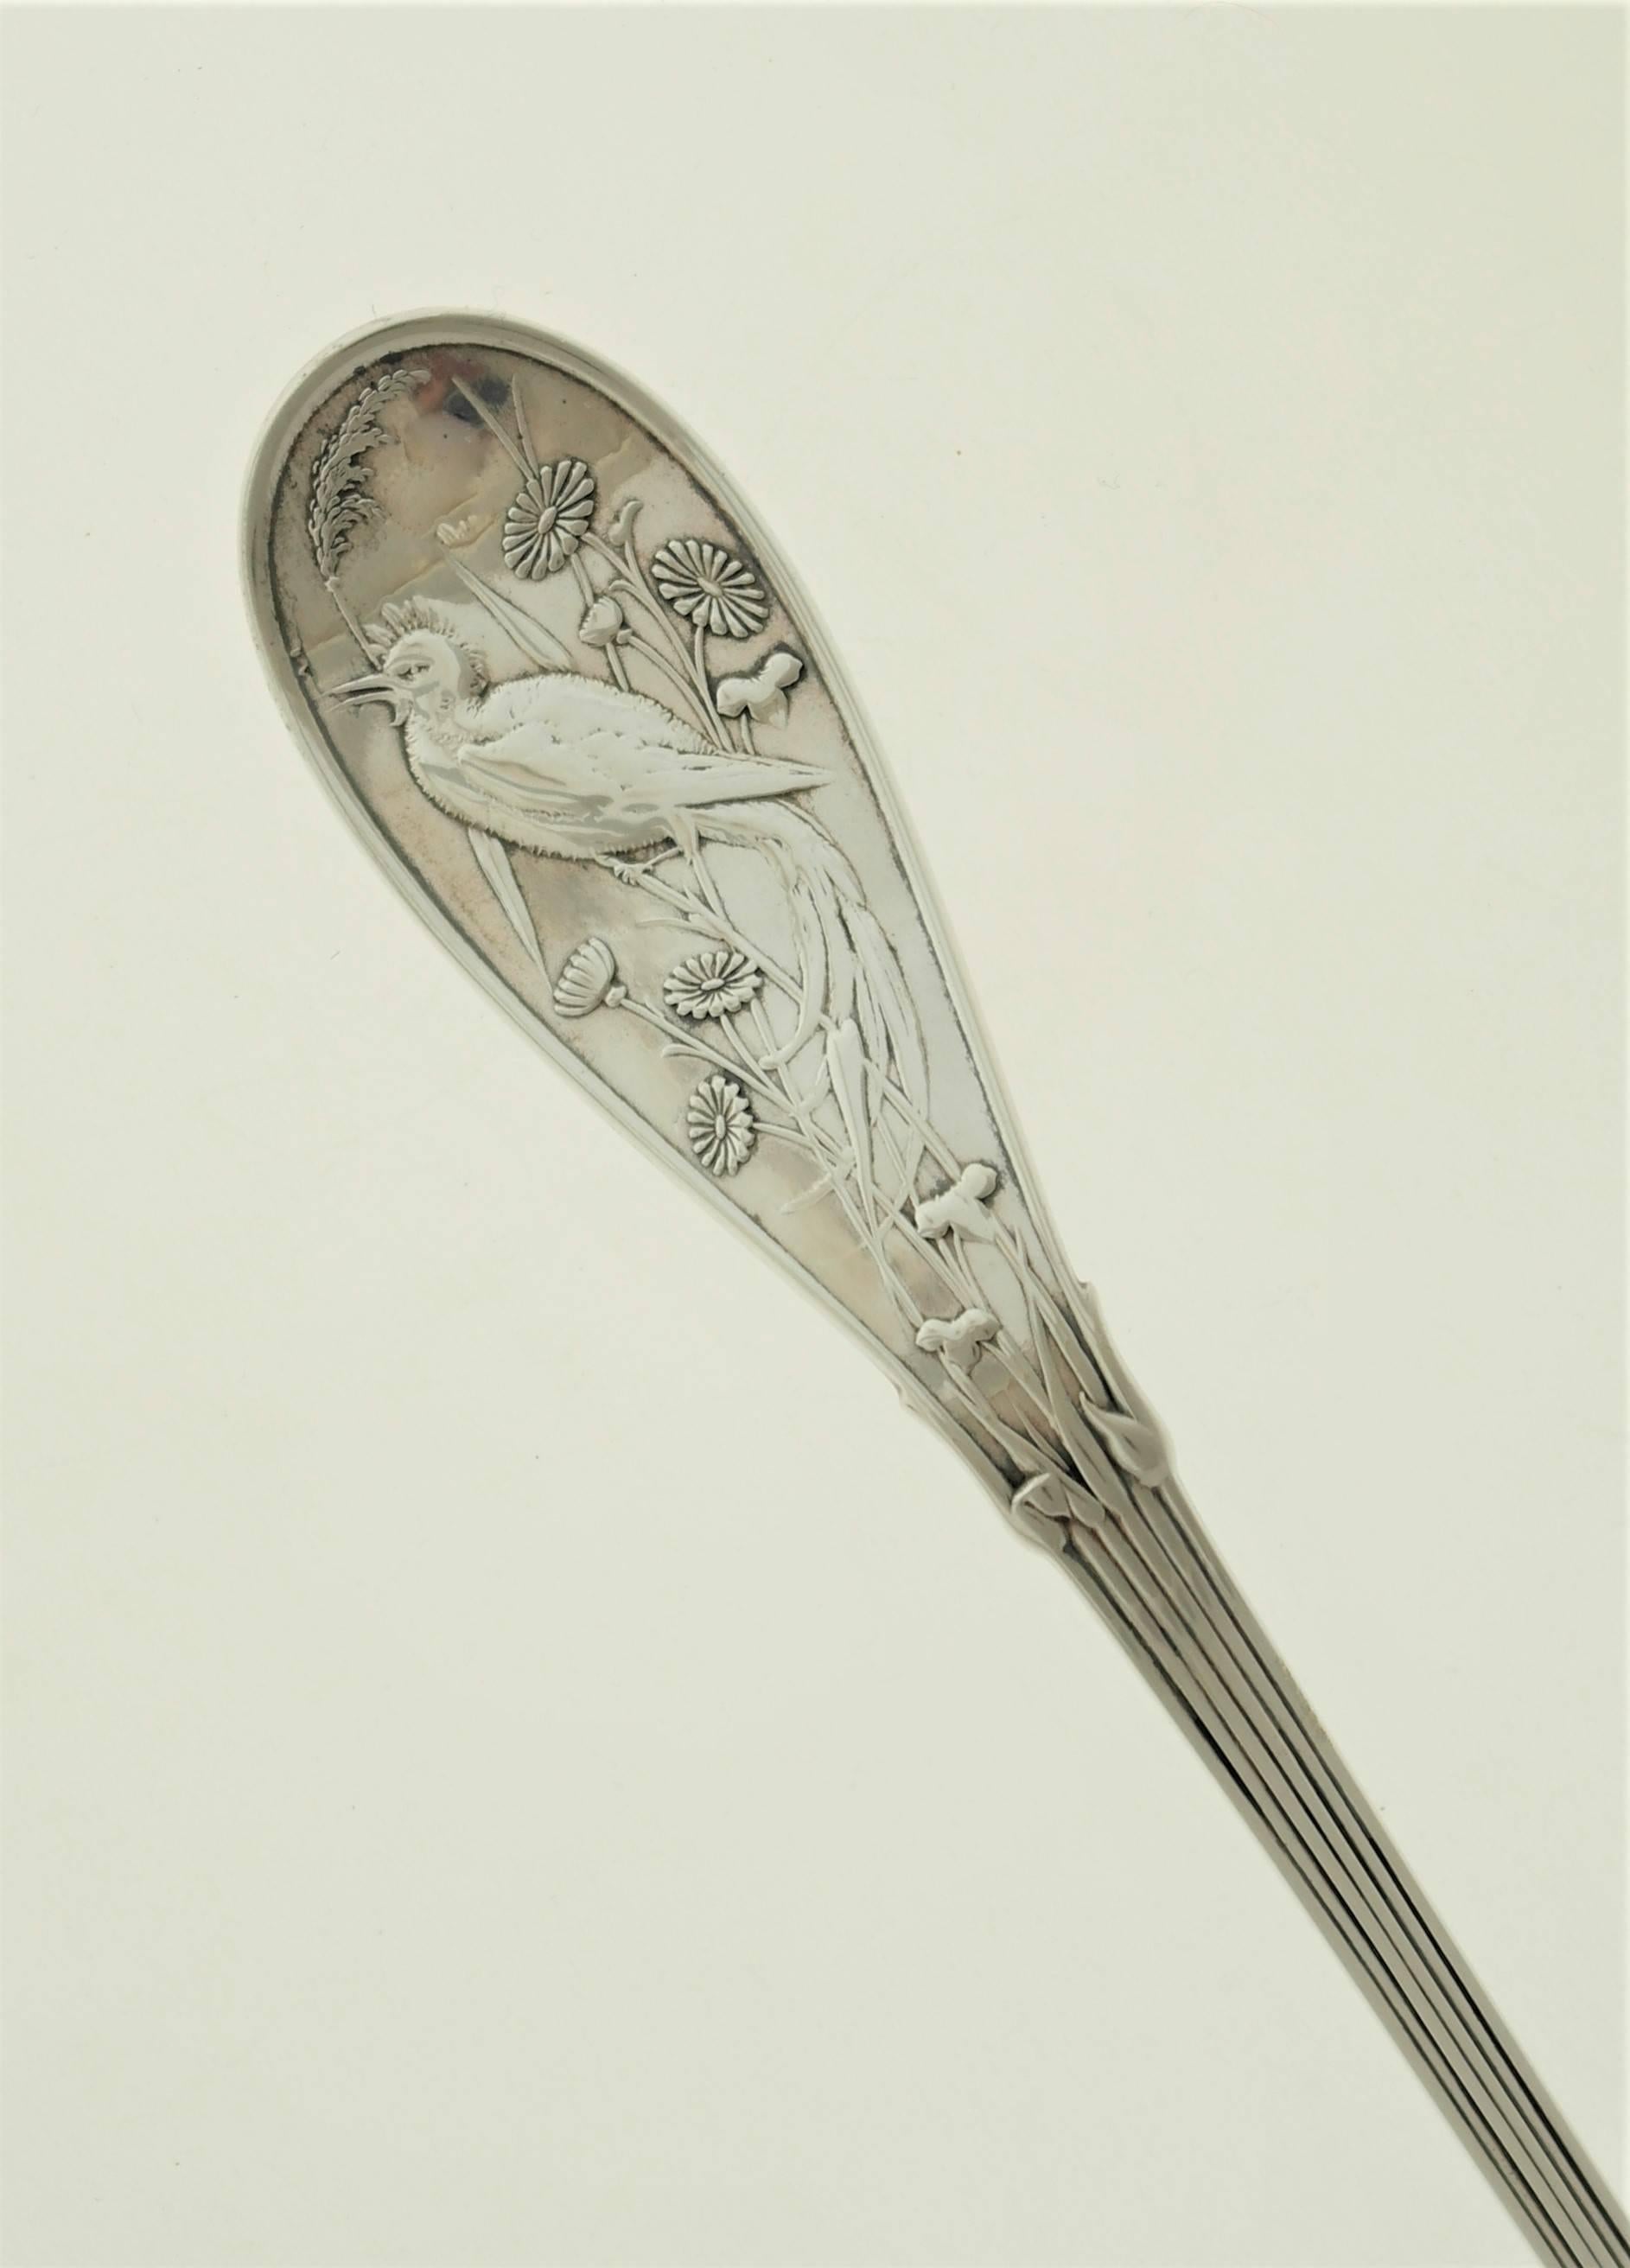 A circa 1871 sterling silver ladle made by Tiffany & Company of New York. Ladle handle with bird in low relief. Dimensions 10 1/2 inches long; bowl is 3 inches wide by 3 inches deep. In excellent condition.